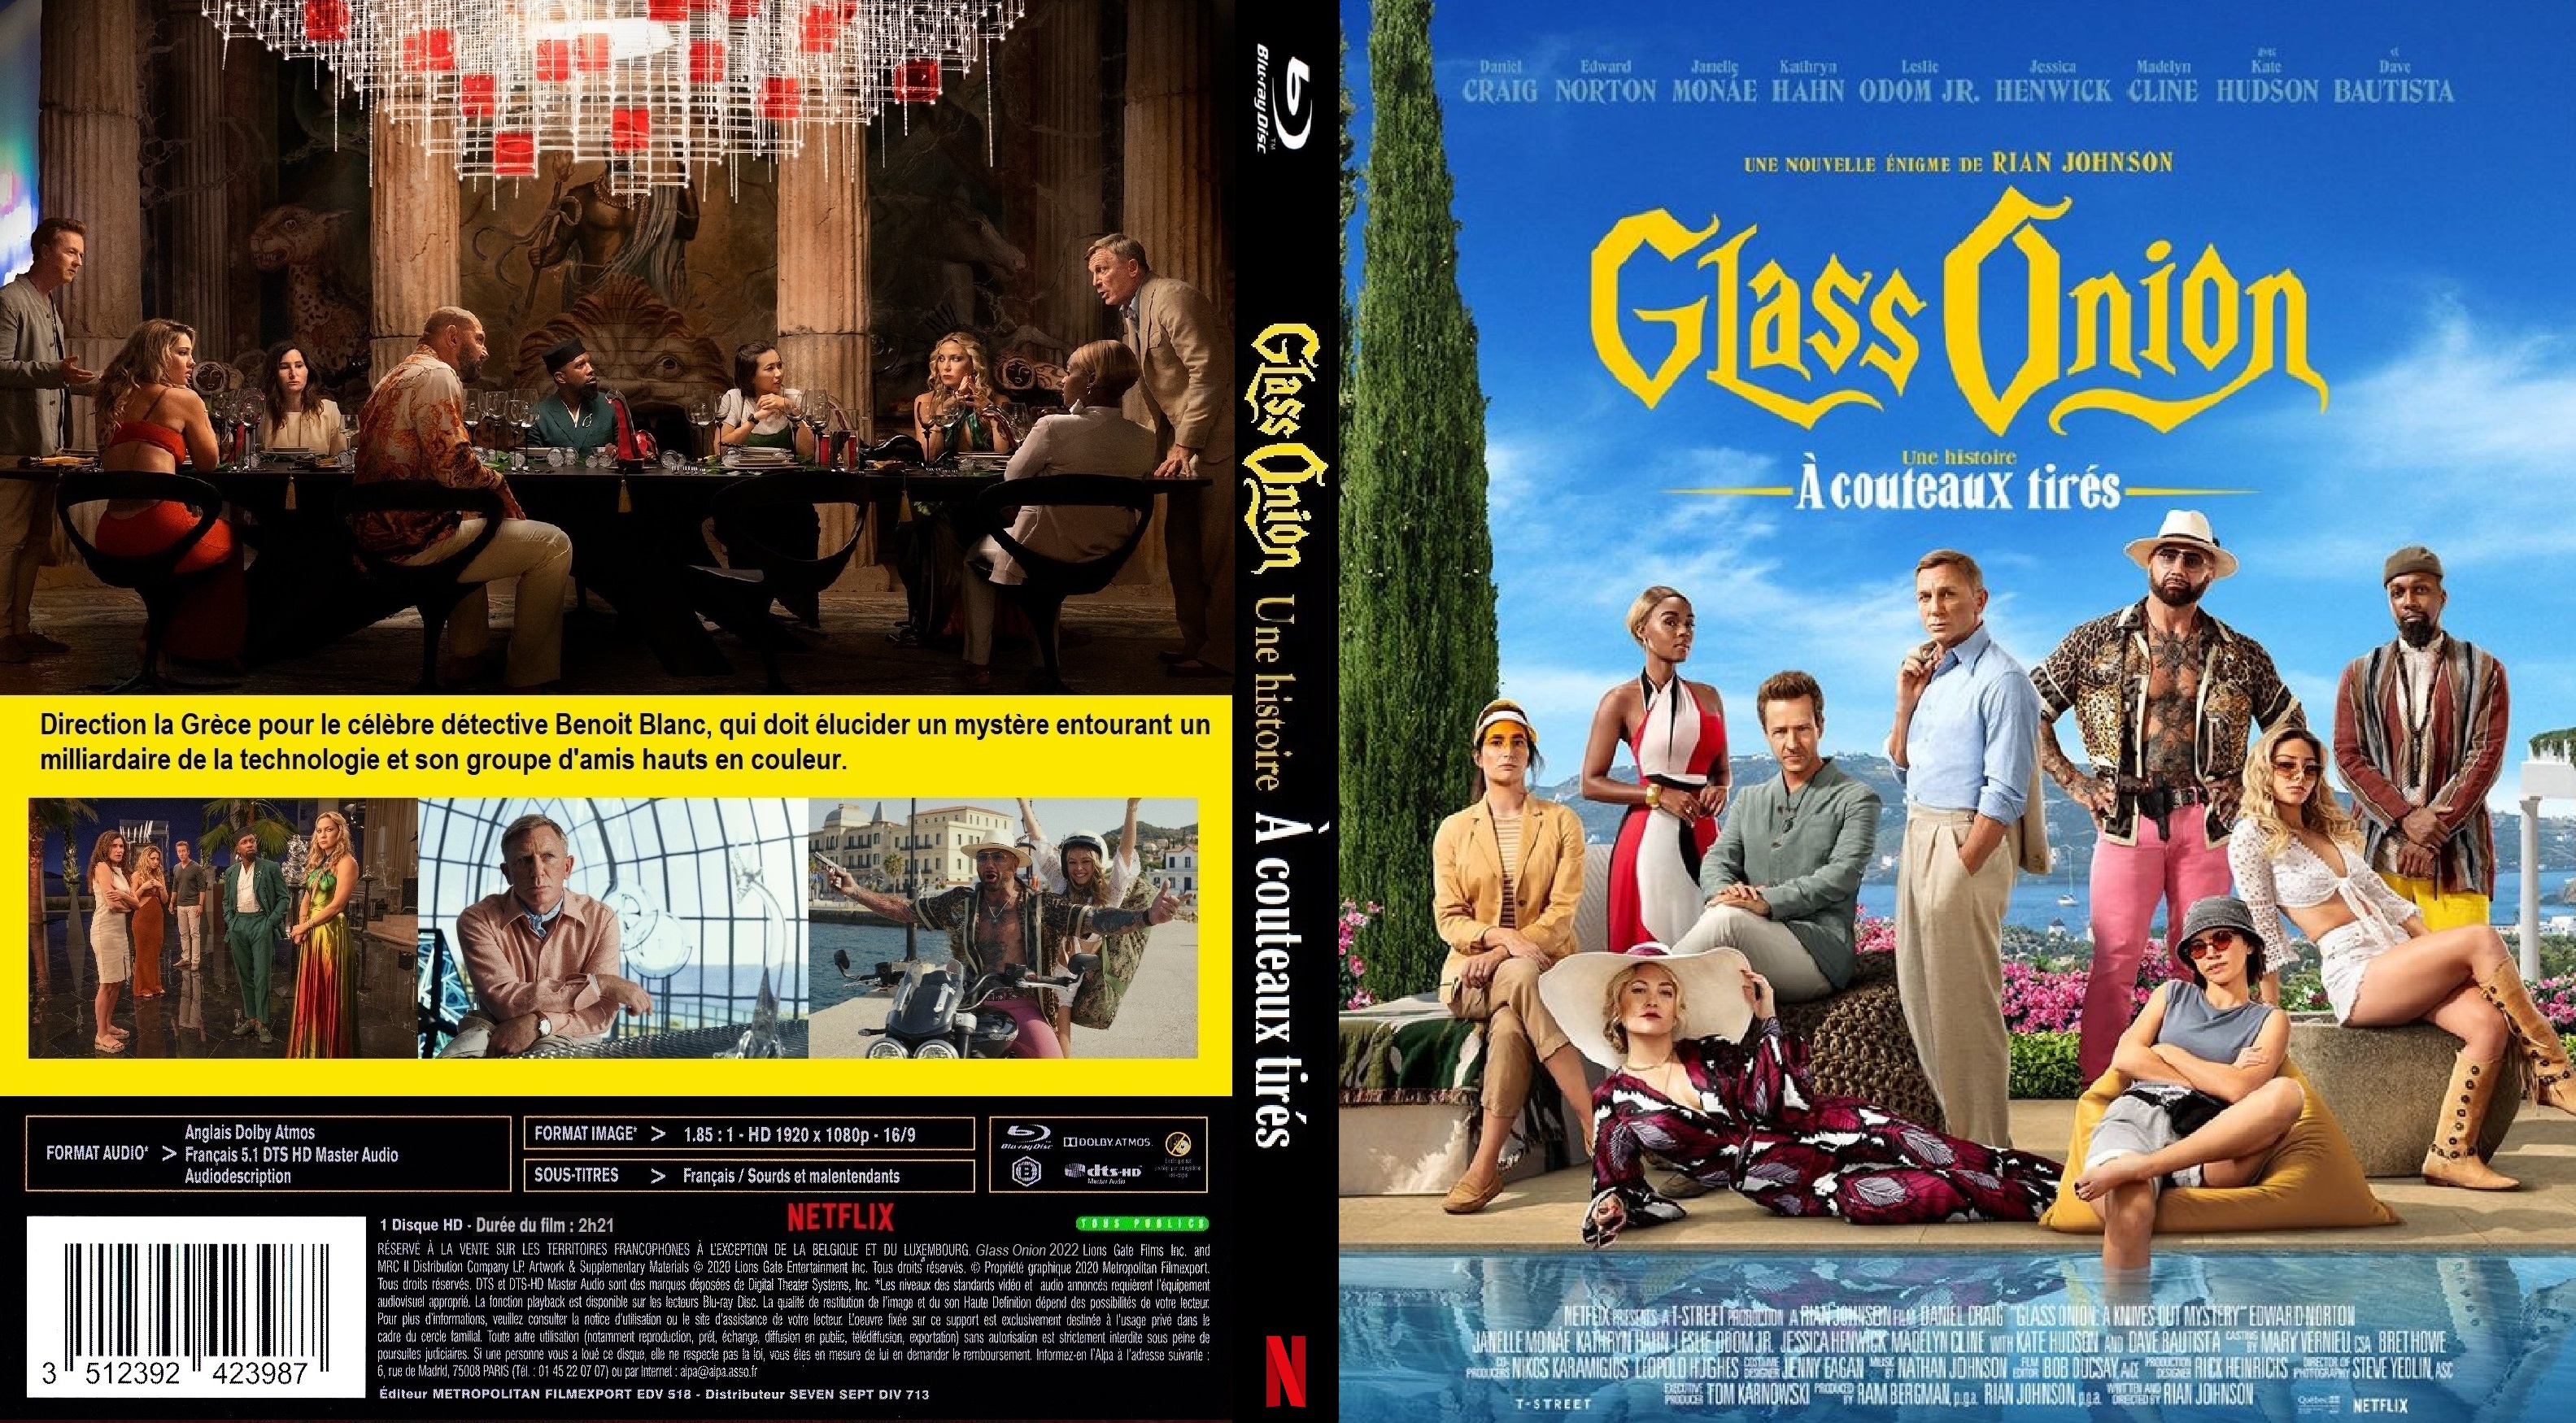 Jaquette DVD Glass Onion une histoire  couteaux tires  BLU RAY custom